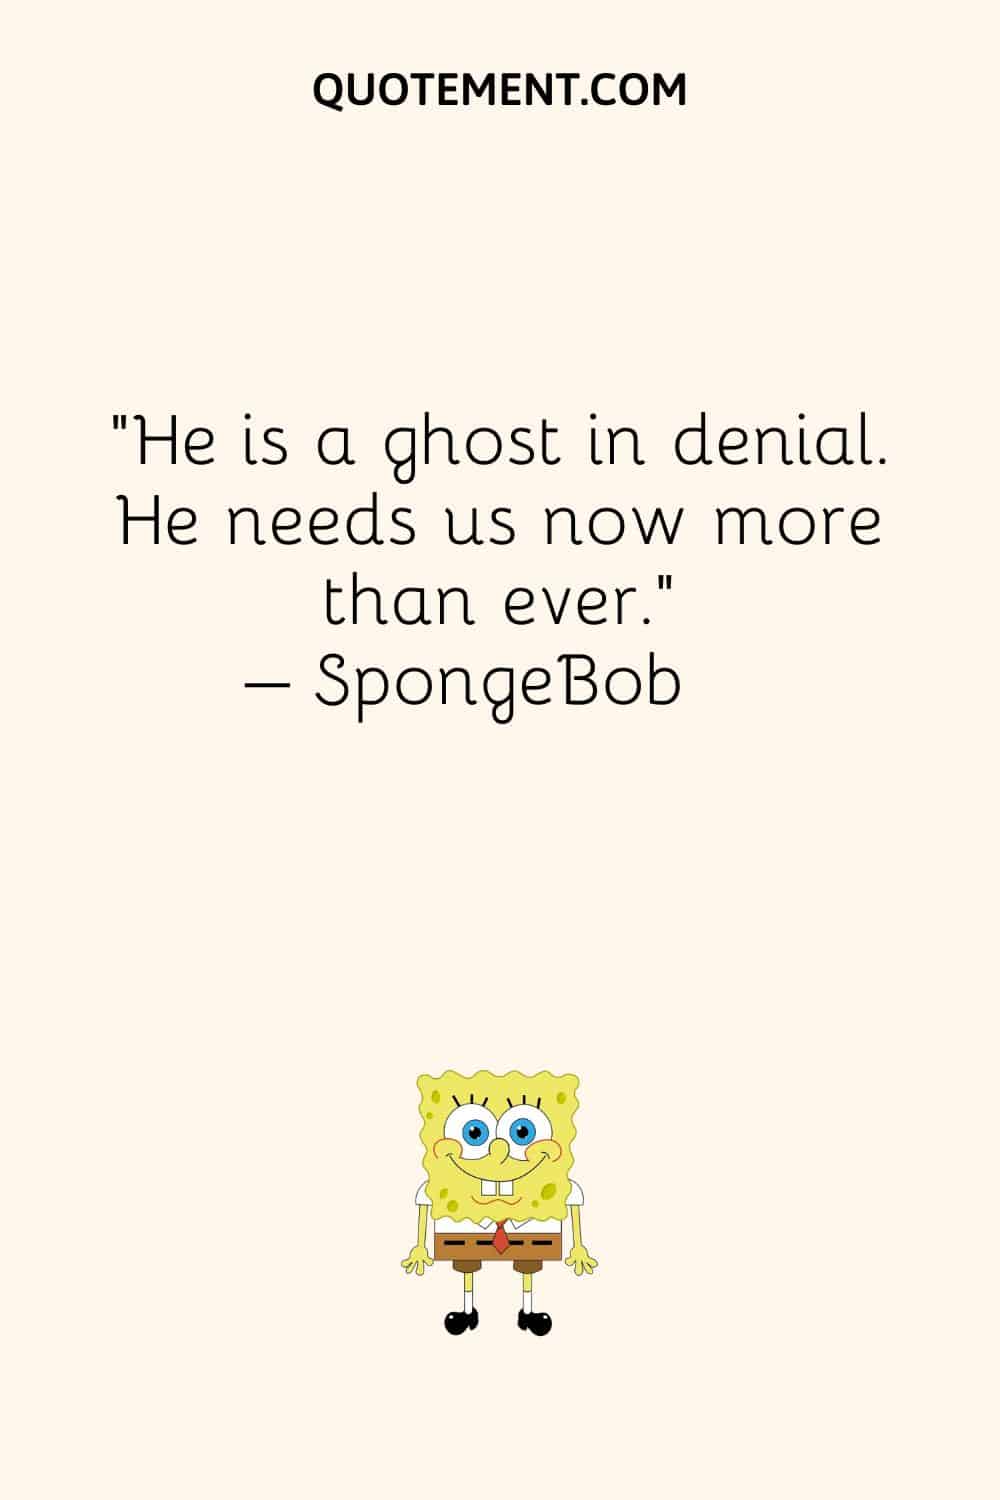 “He is a ghost in denial. He needs us now more than ever.” – SpongeBob